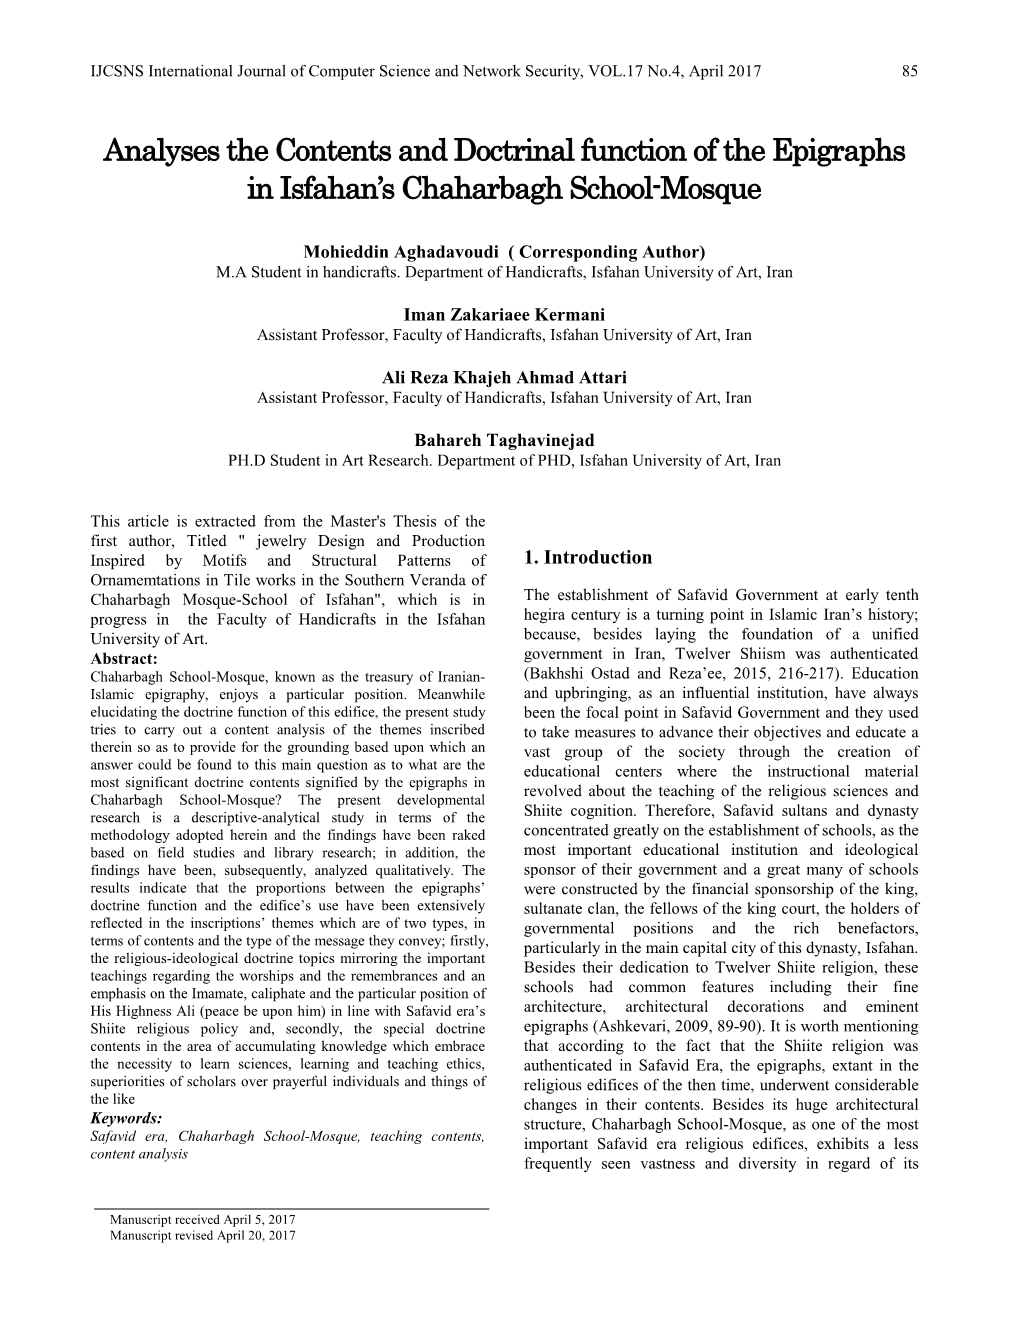 Analyses the Contents and Doctrinal Function of the Epigraphs in Isfahan's Chaharbagh School-Mosque